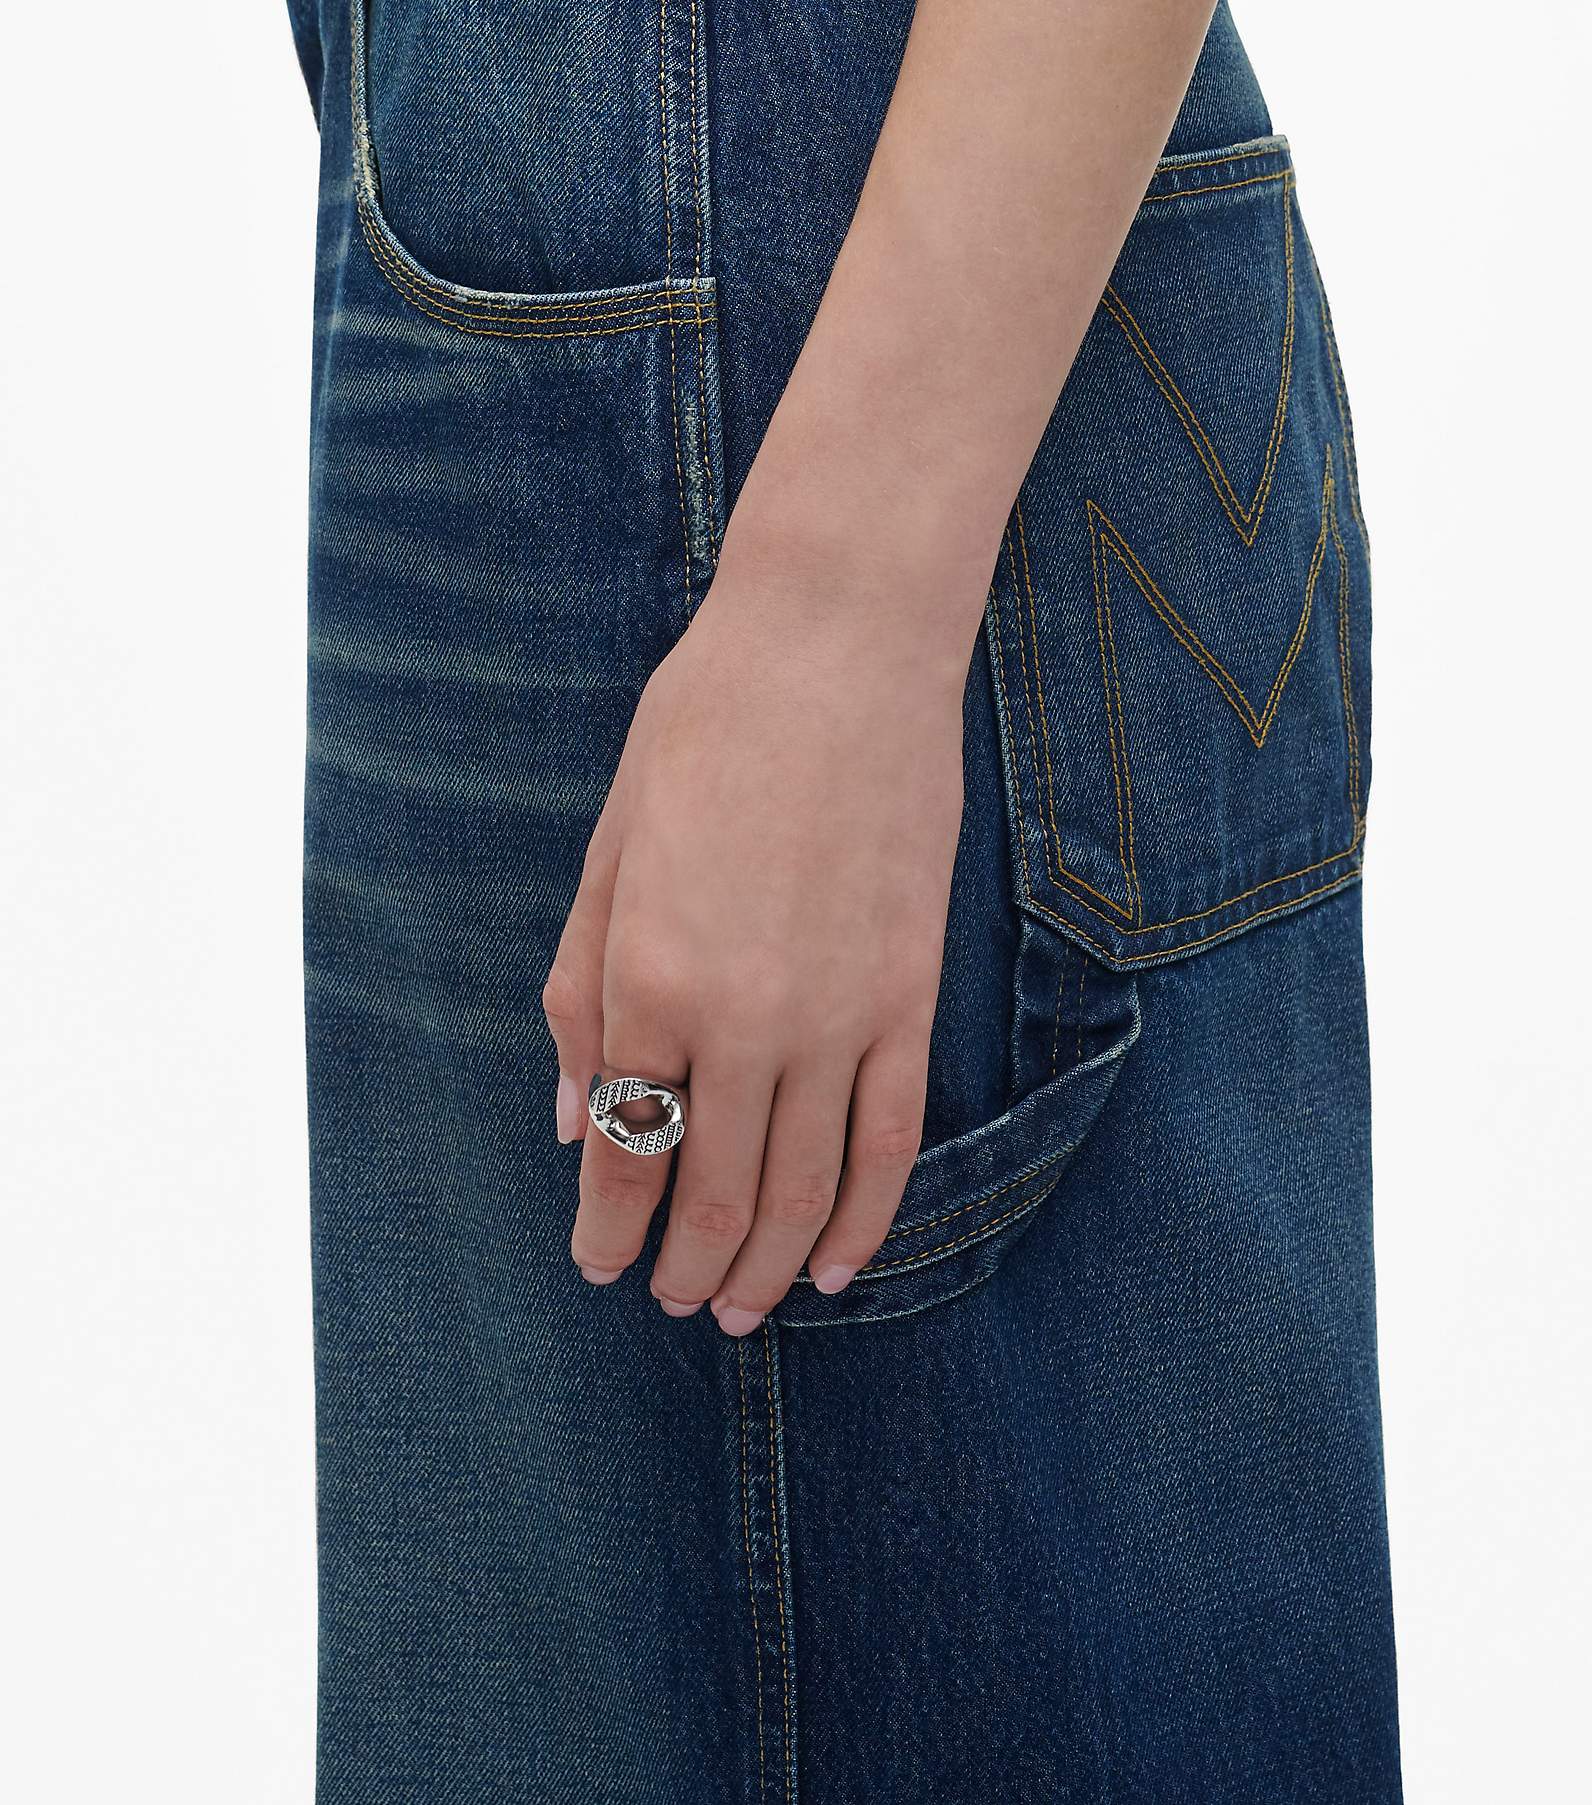 The Monogram Ring, Marc Jacobs